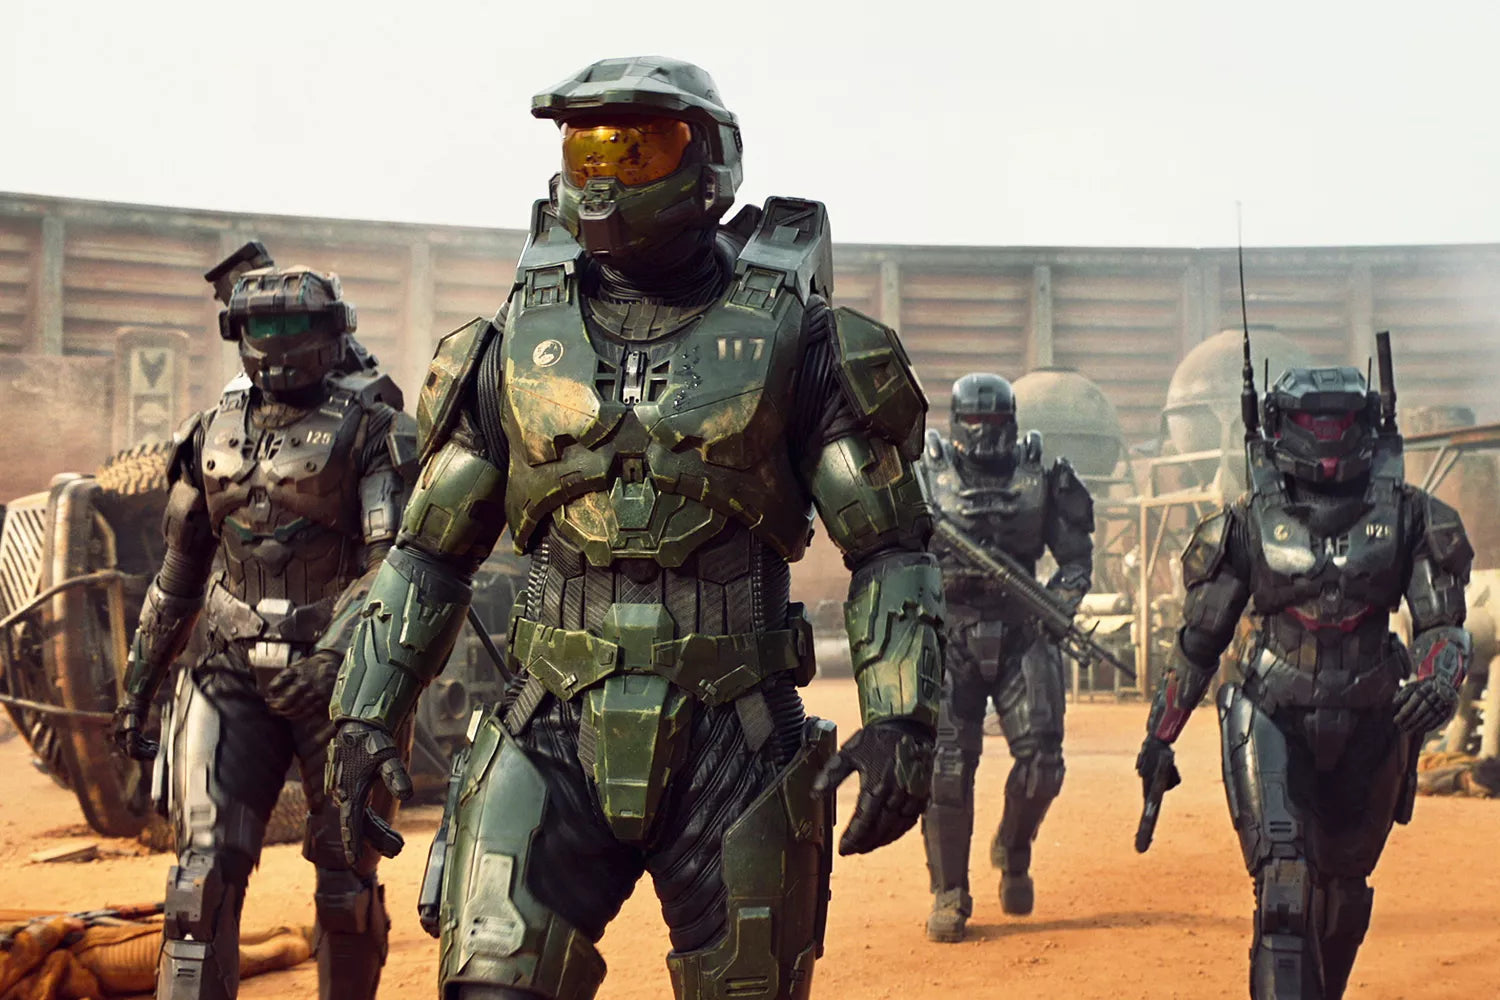 Bringing the vast landscape of the smash hit Halo video games to the screen was a challenge accepted by executive producer Steven Spielberg. Pablo Schreiber stars as resolute supersoldier Master Chief Petty Officer John-117, who becomes involved in humanity's 26th-century struggle against an aggressive bunch of aliens known as the Covenant.